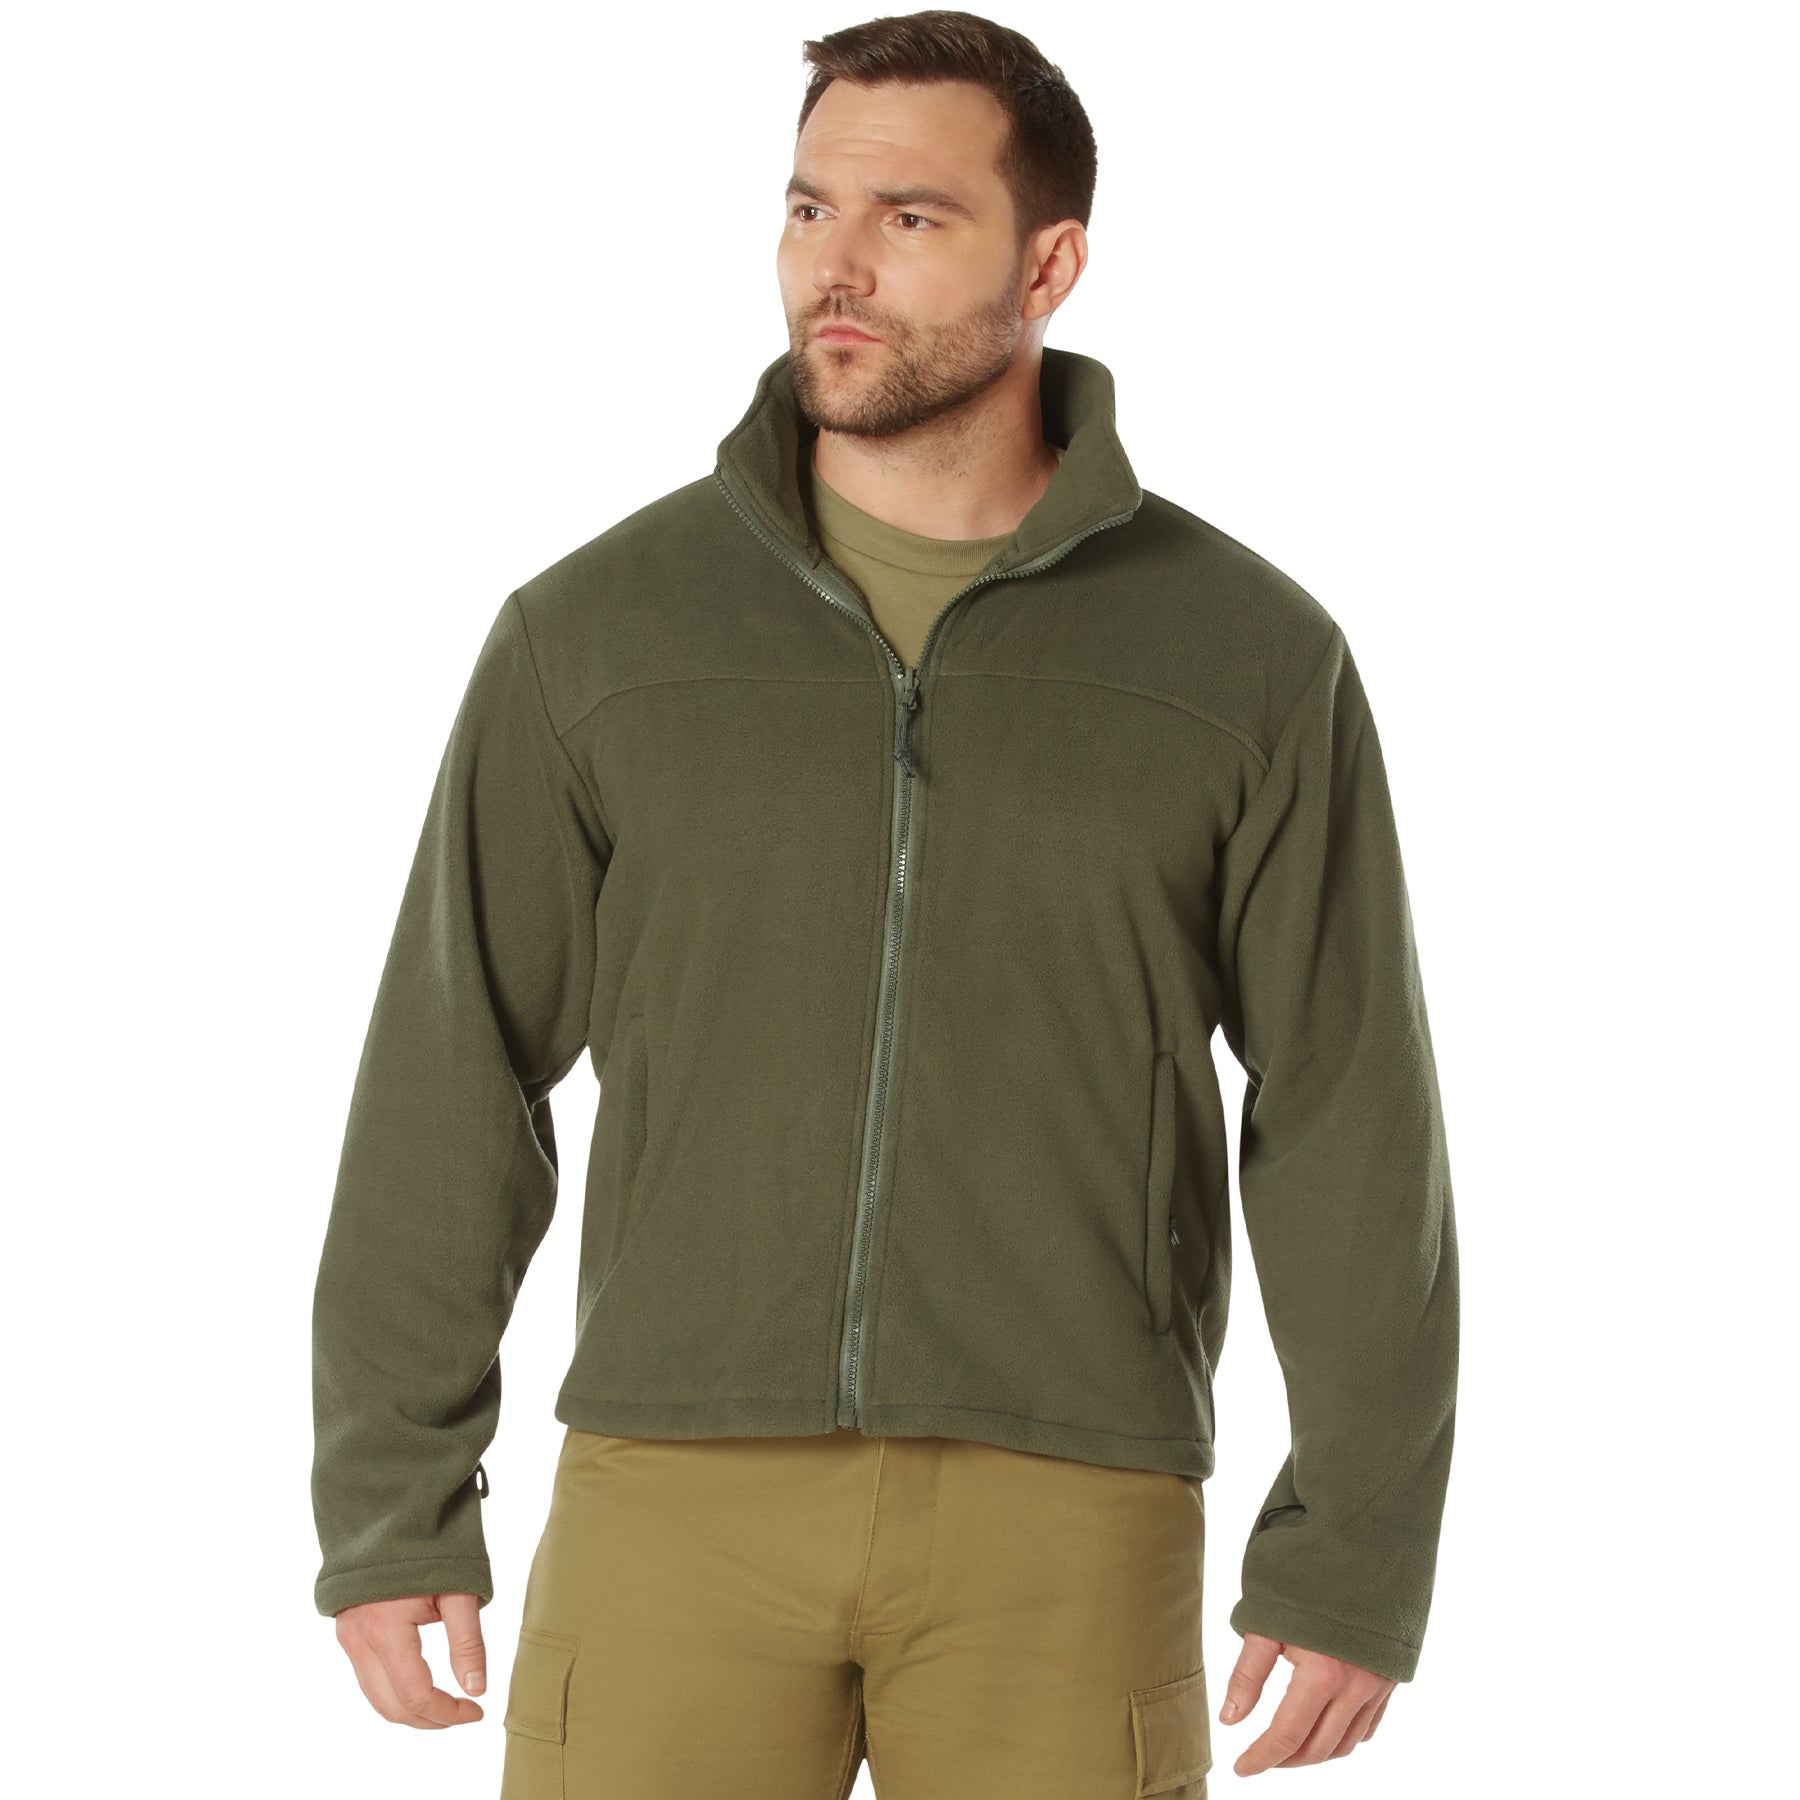 Poly 3-In-1 Spec Ops Tactical Soft Shell Jackets Olive Drab